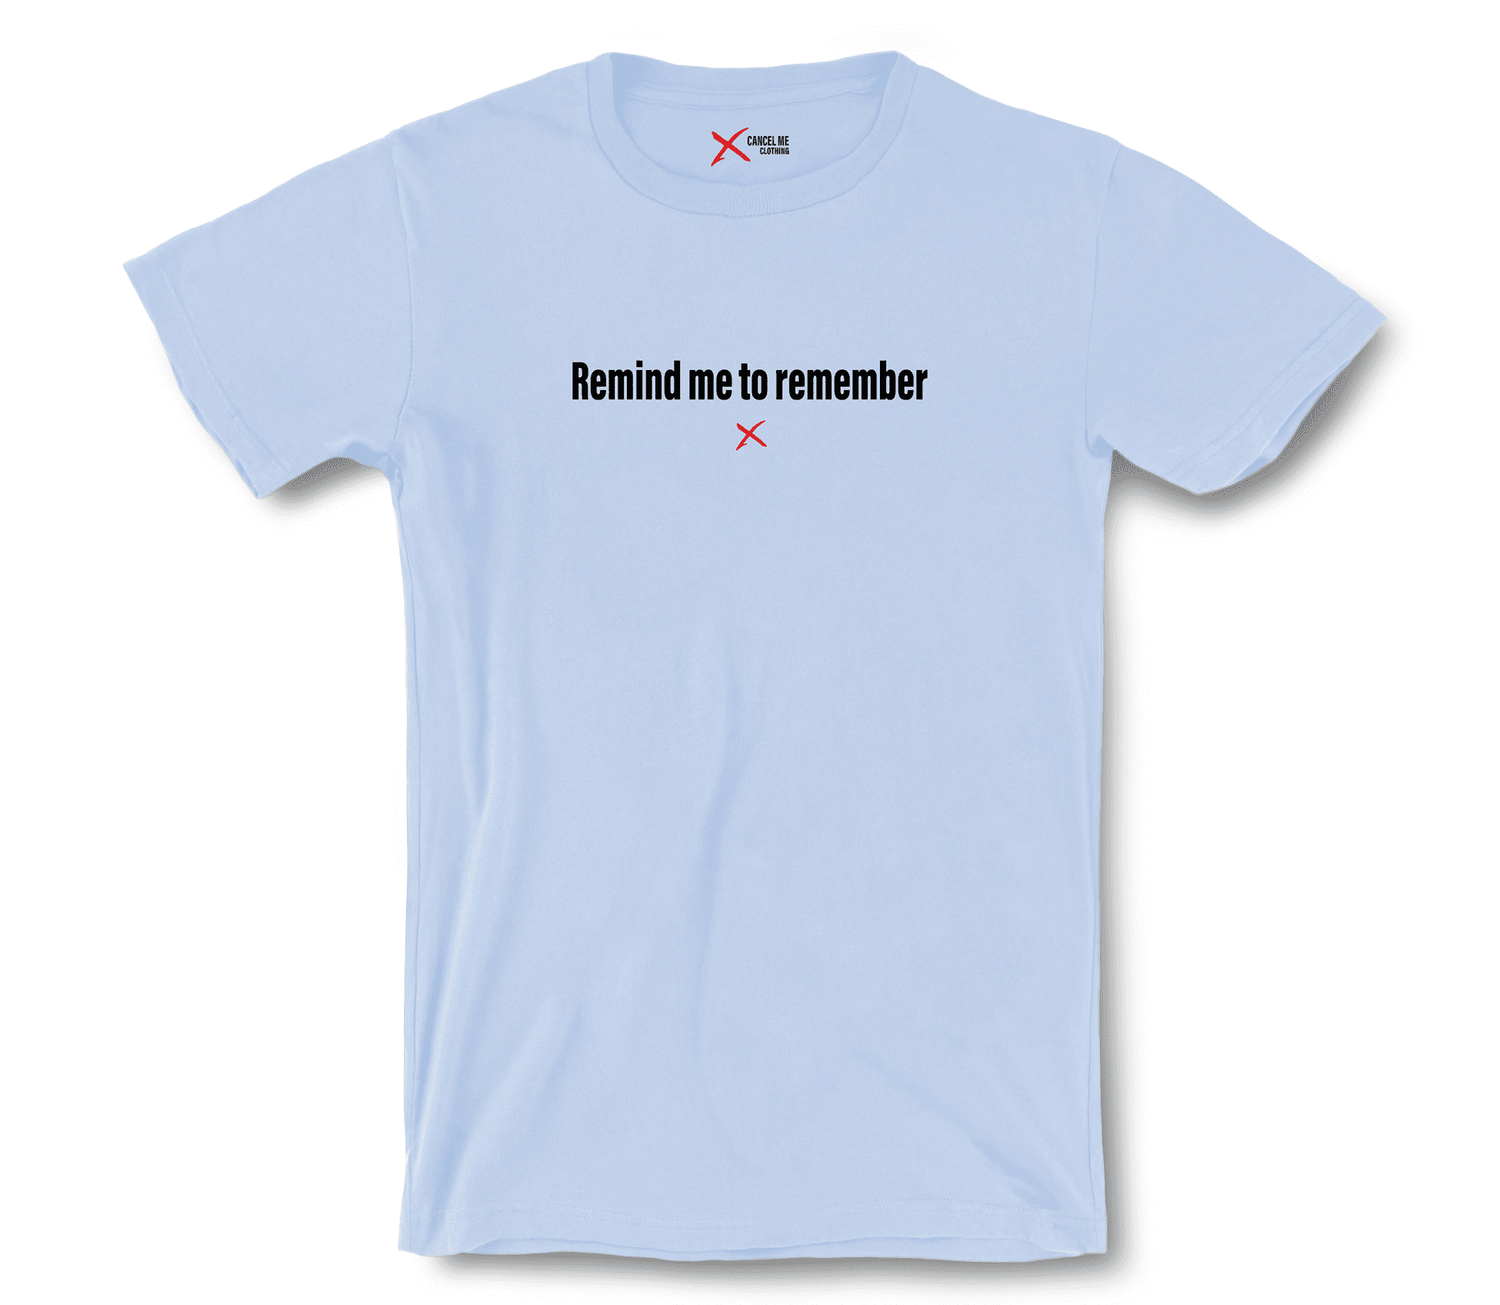 lp-school_3-shirt_7791577727146_remind-me-to-remember-shirt_Baby Blue.png